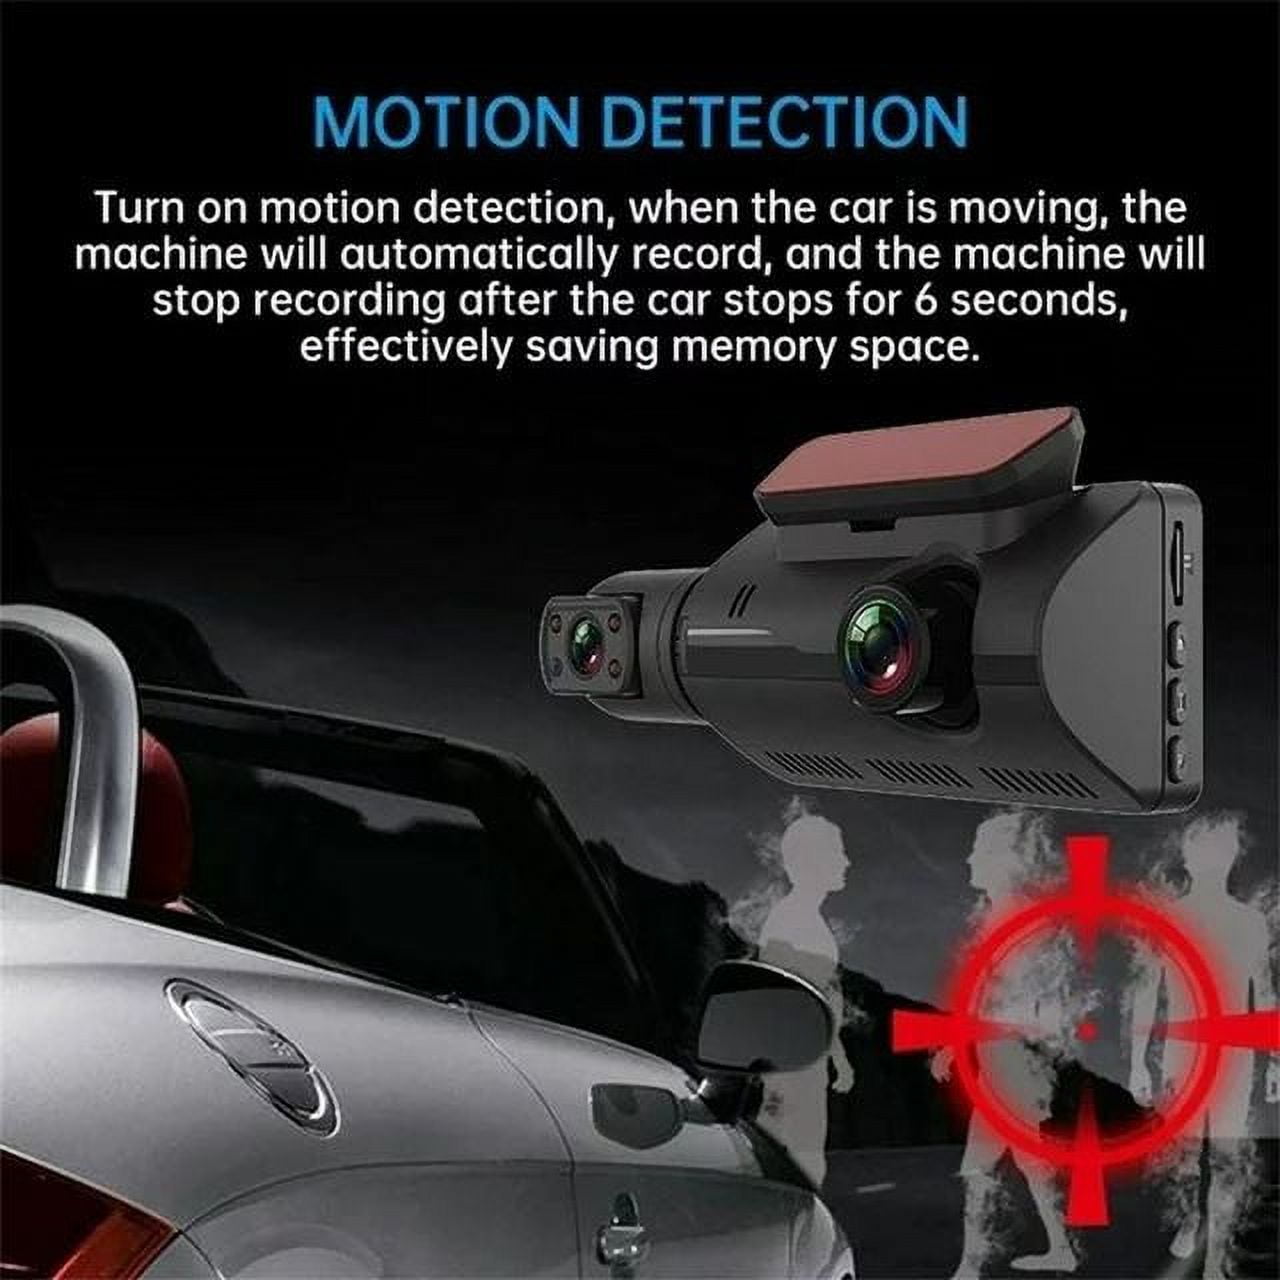 Dropship 1080P Dual Lens Dash Cam Vehicle Driving Recorder Car DVR With  WiFi GPS G-Sensor APP Control Motion Detection Parking Monitor Night Vision  to Sell Online at a Lower Price